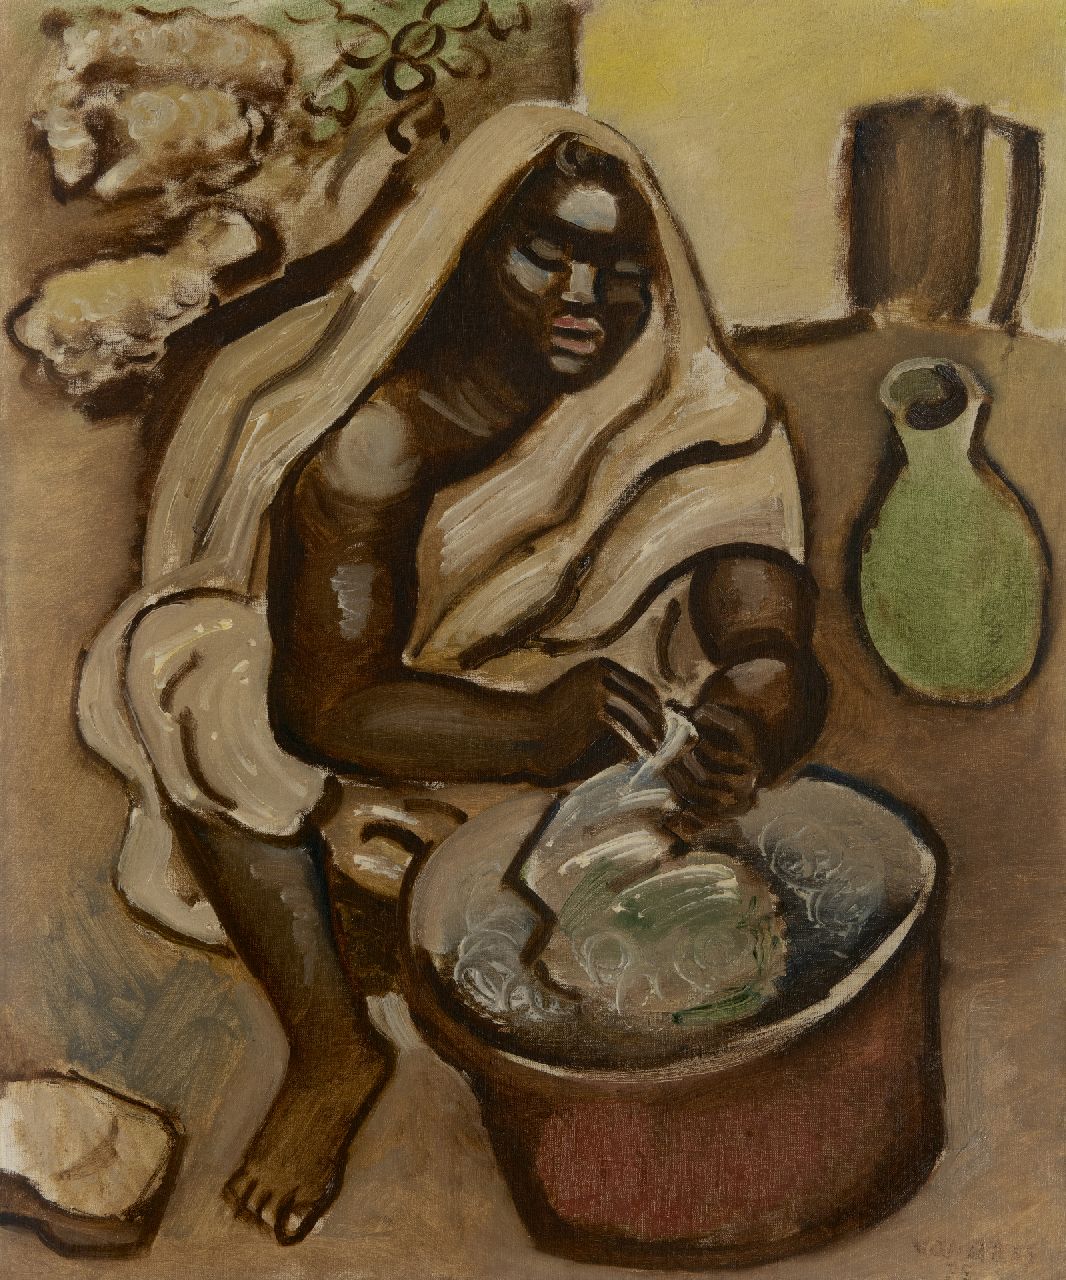 Rees O. van | Otto van Rees | Paintings offered for sale | North African woman, oil on canvas 65.7 x 54.5 cm, signed l.r. and dated '35